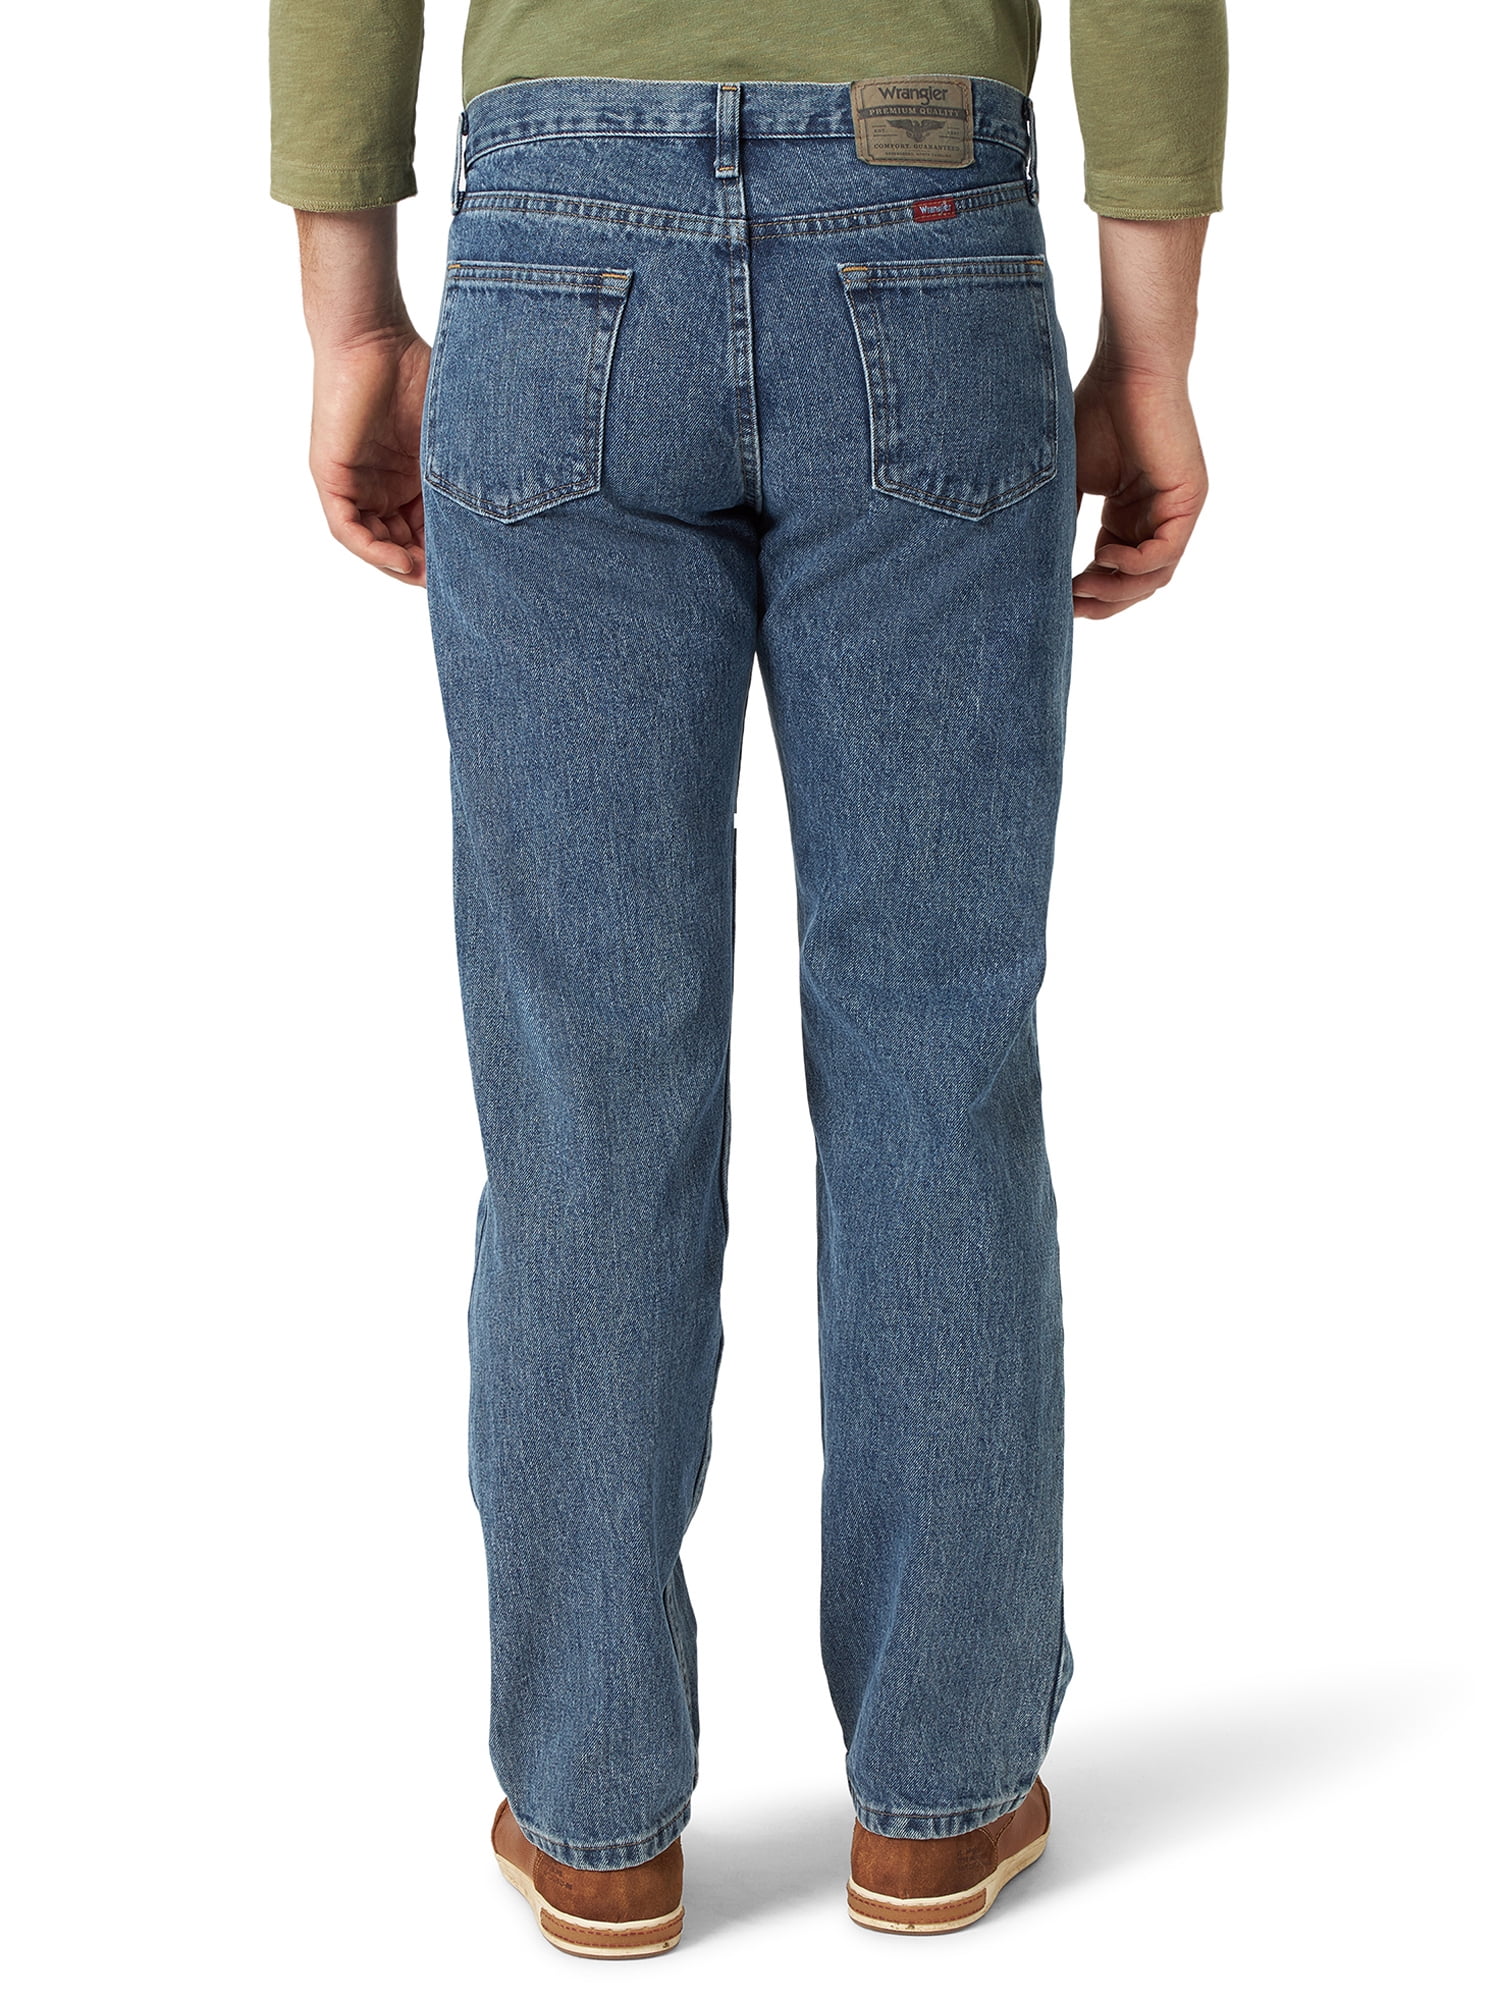 wrangler big men's relaxed fit jeans